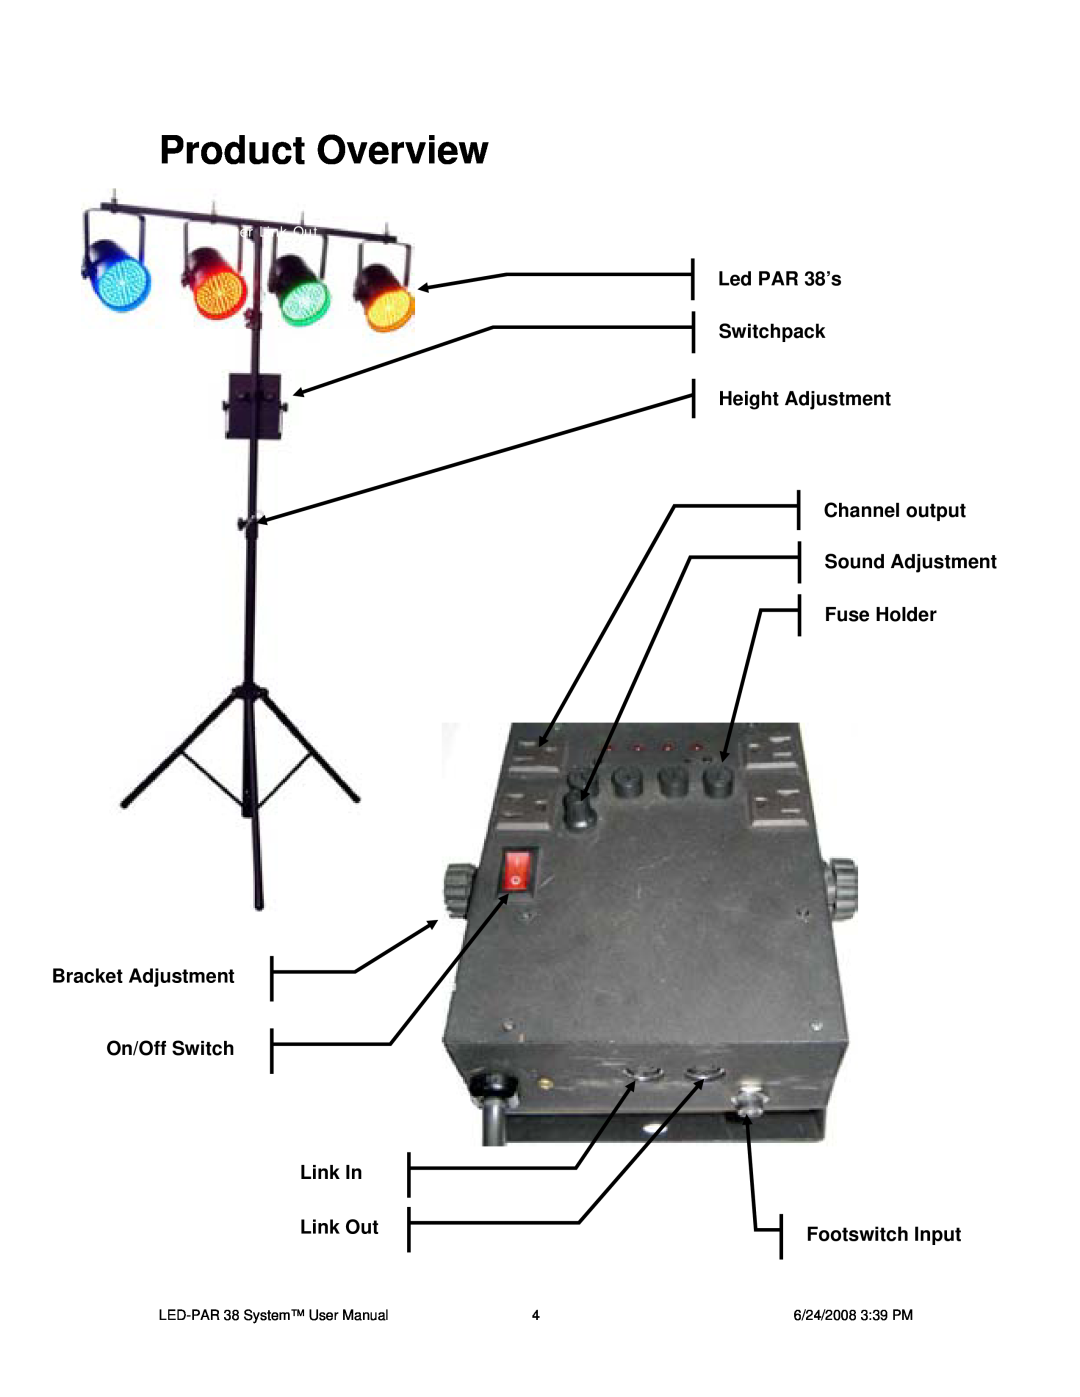 Chauvet Product Overview, Bracket Adjustment On/Off Switch Link In Link Out, Led PAR 38’s Switchpack Height Adjustment 